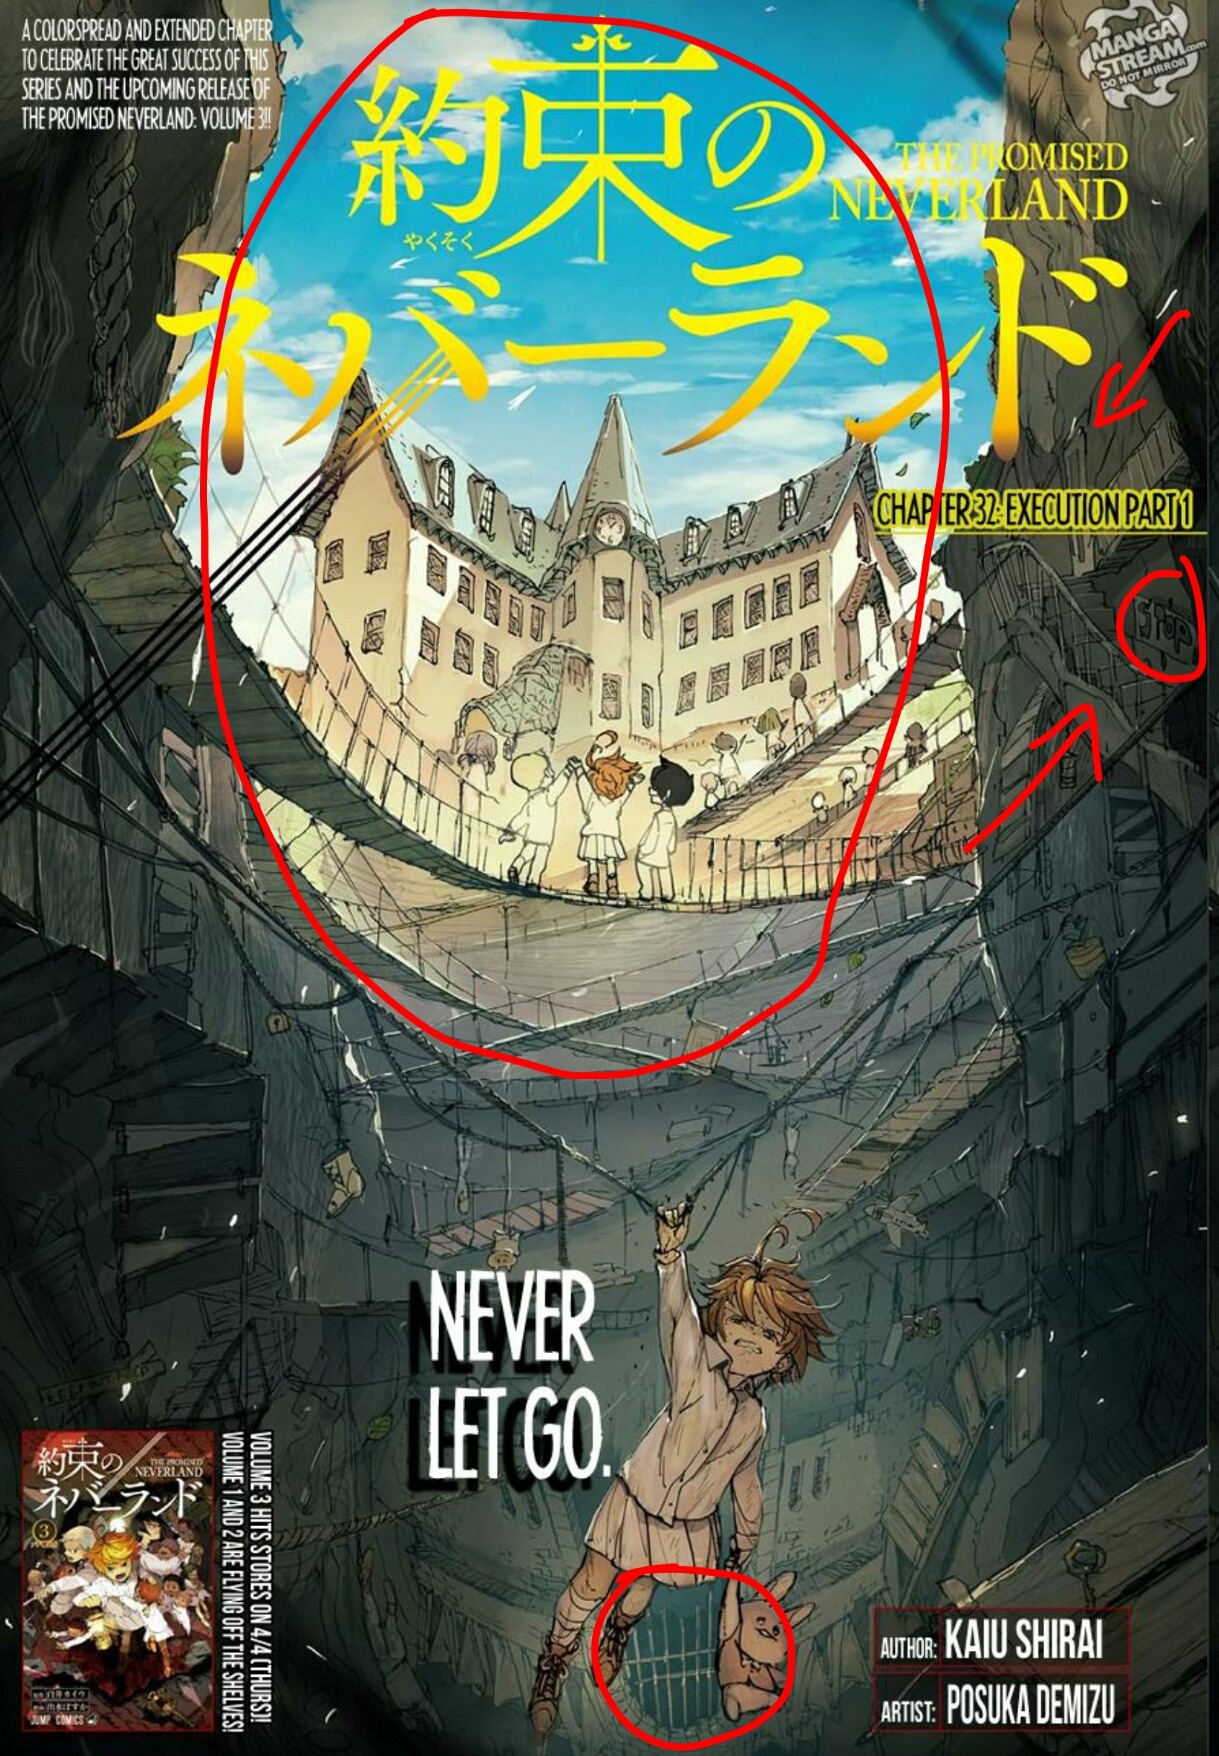 New 'The Promised Neverland' Book Explores Links With Western